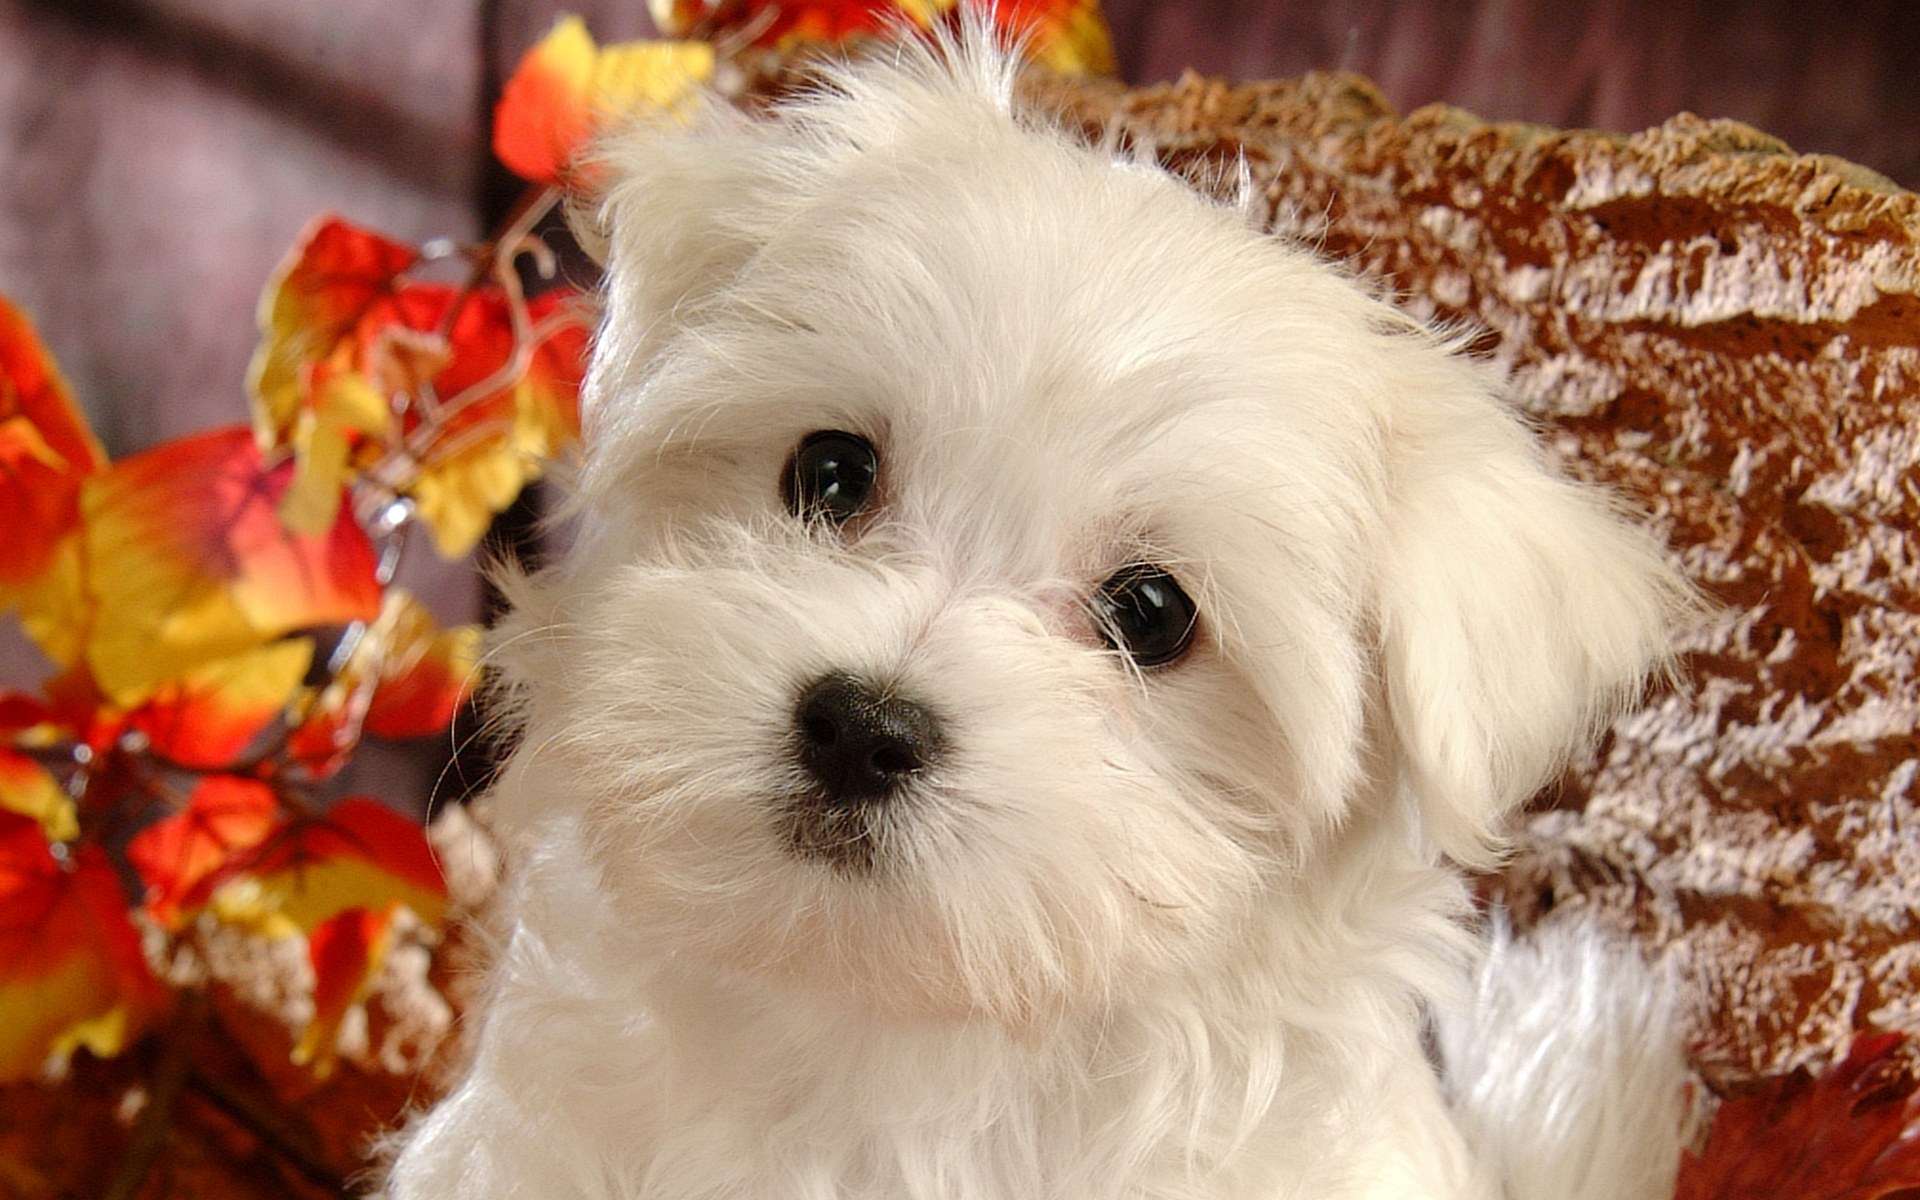 Fluffy Maltese Puppy Dogs White Puppies Wallpaper